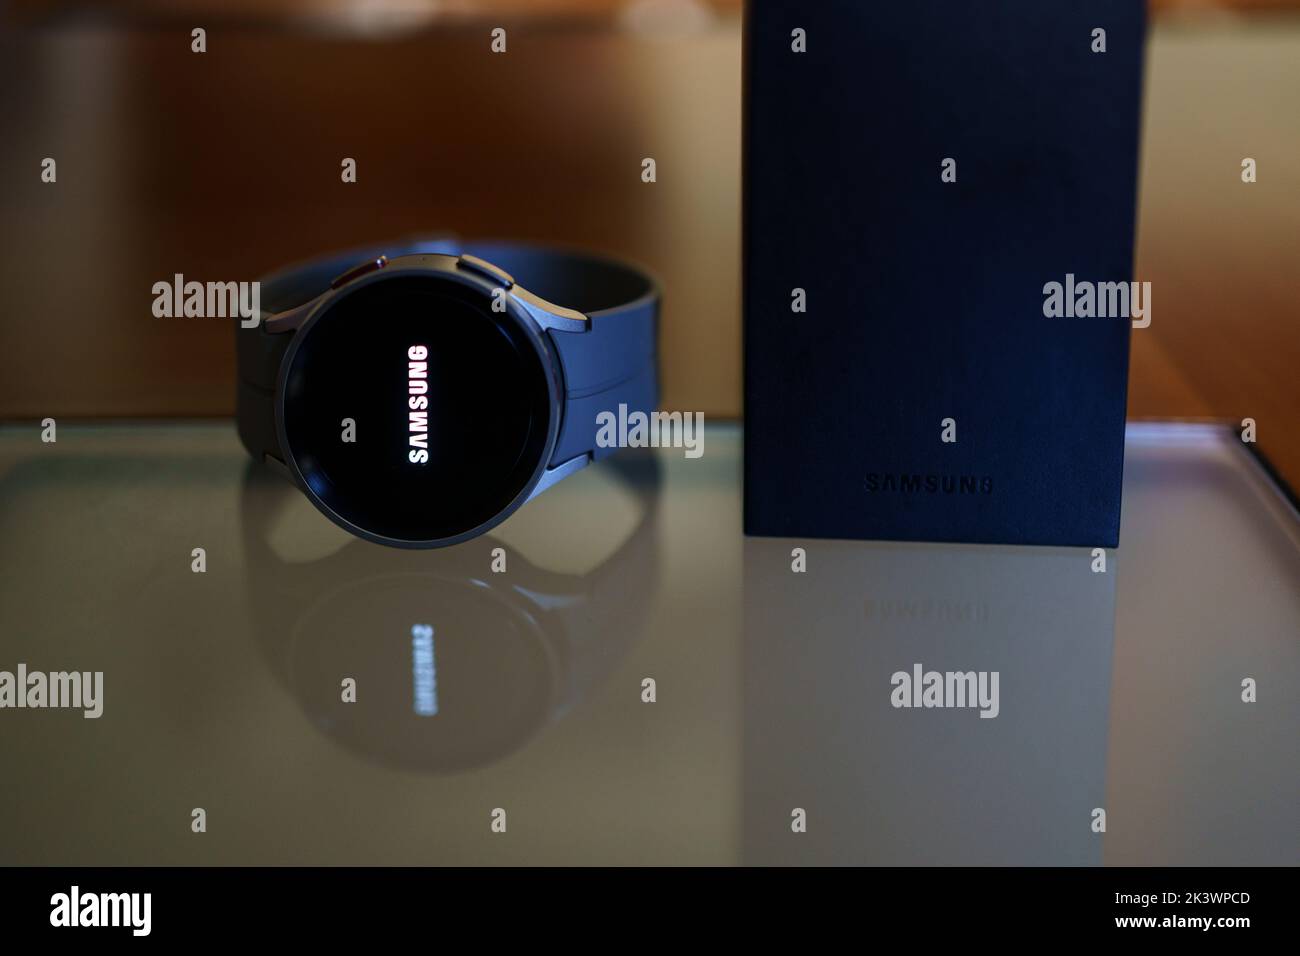 Granada, Andalusia, Spain - September 28, 2022: New Samsung Watch 5 Pro in its box. Stock Photo